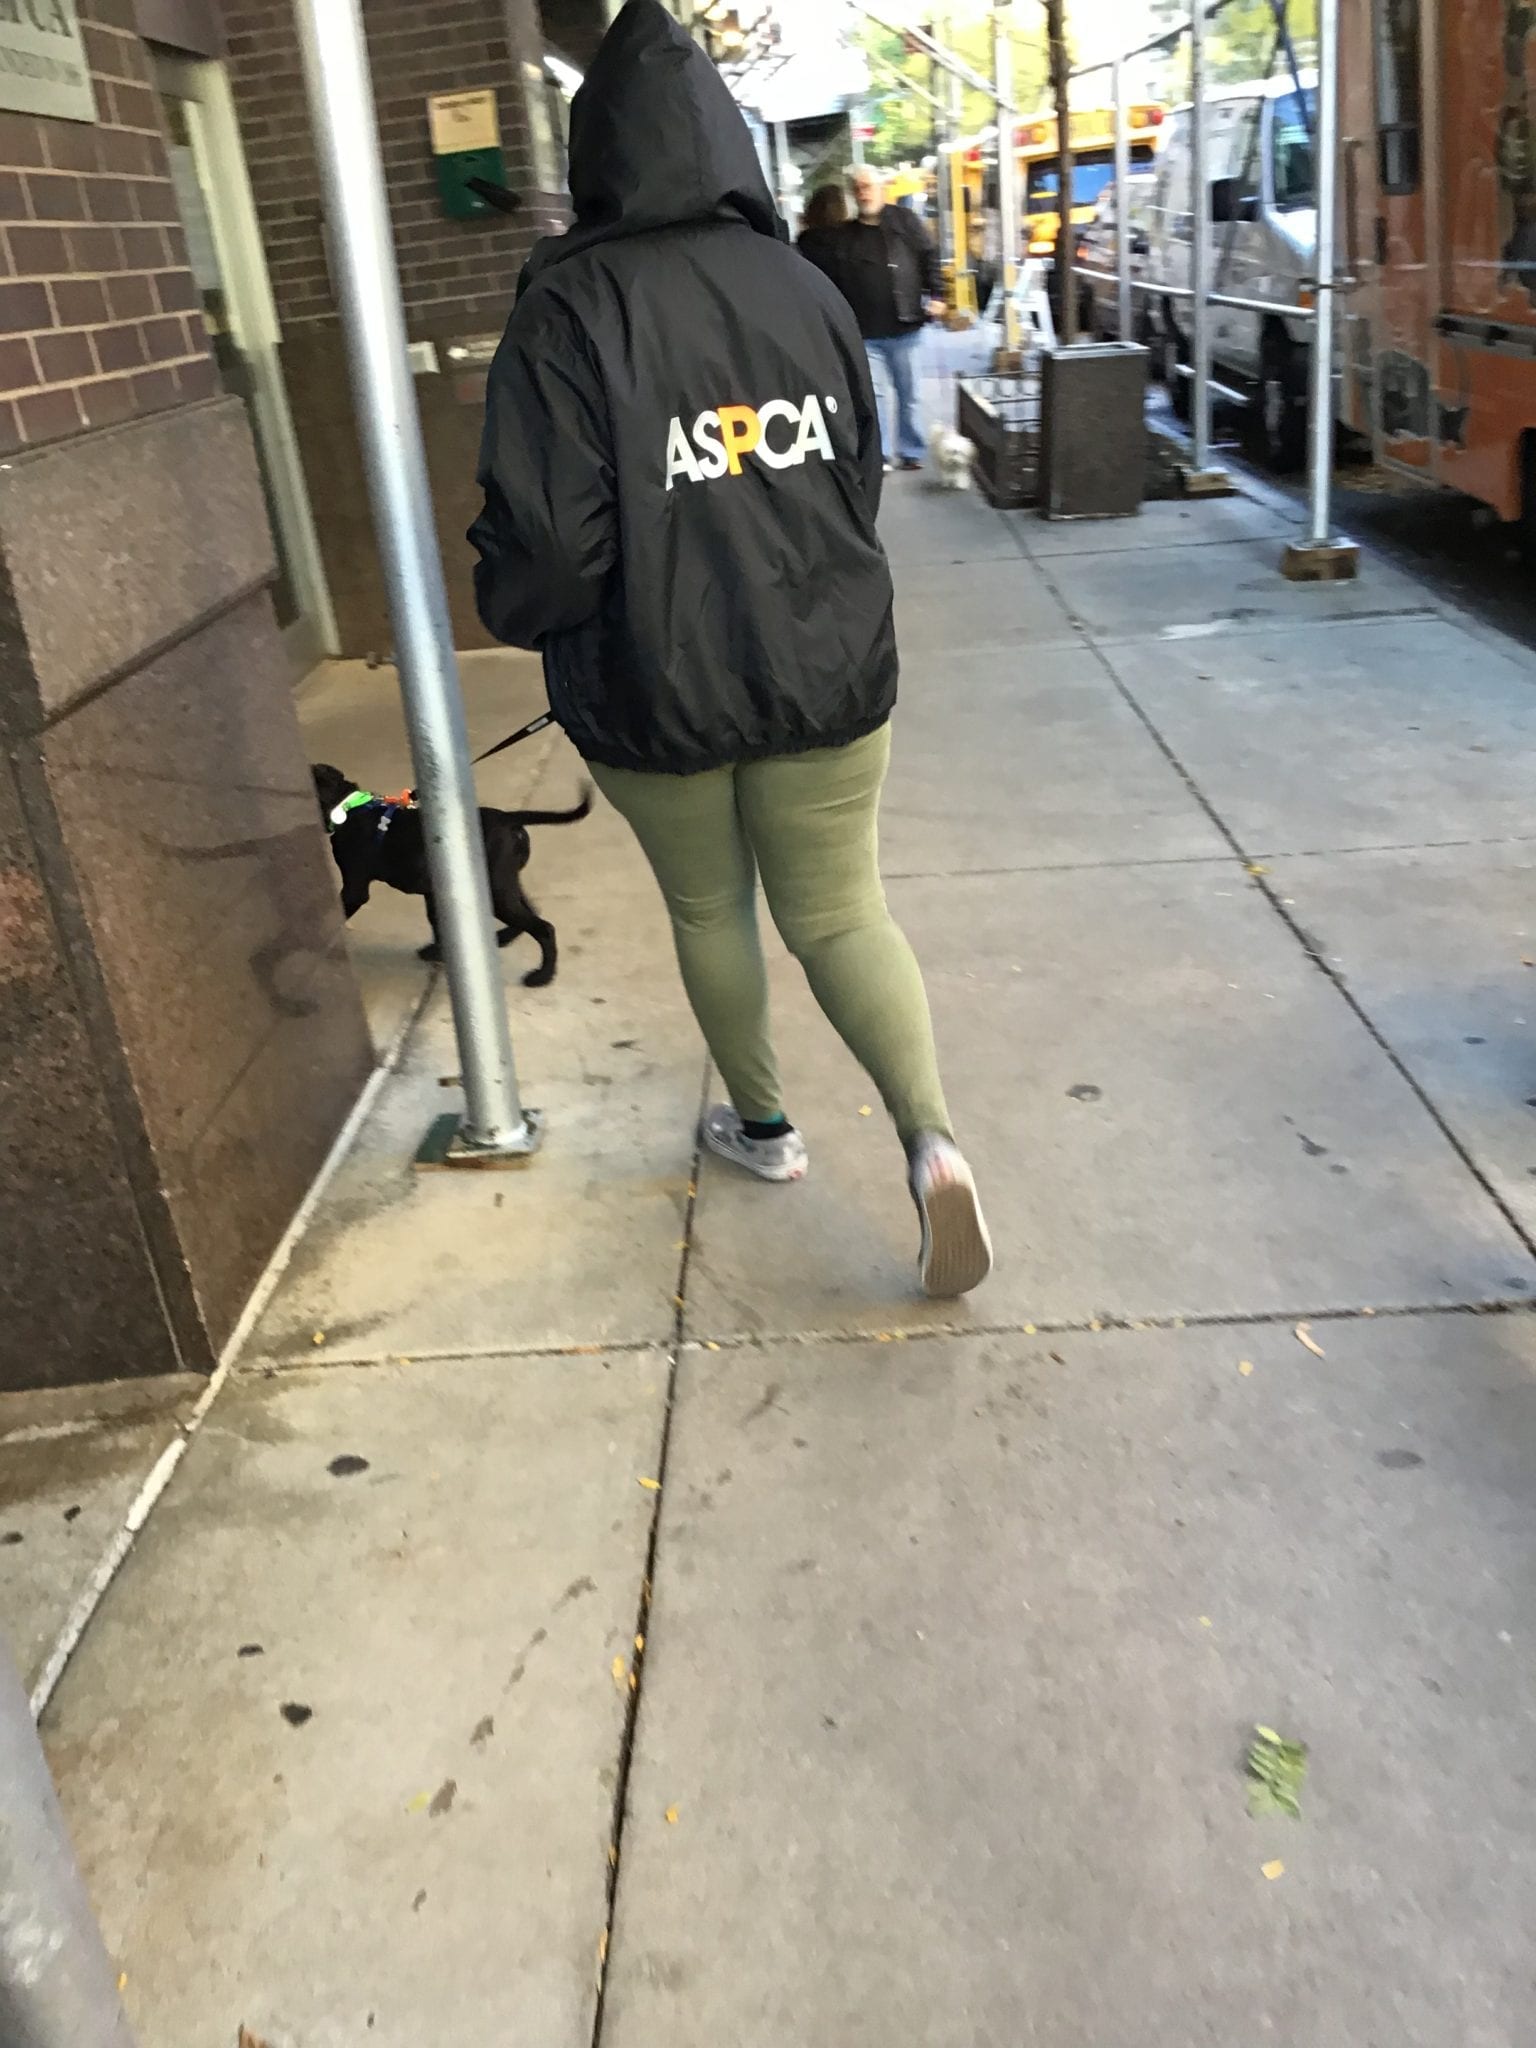 Dog coming back from a walk outside ASPCA Adoption center